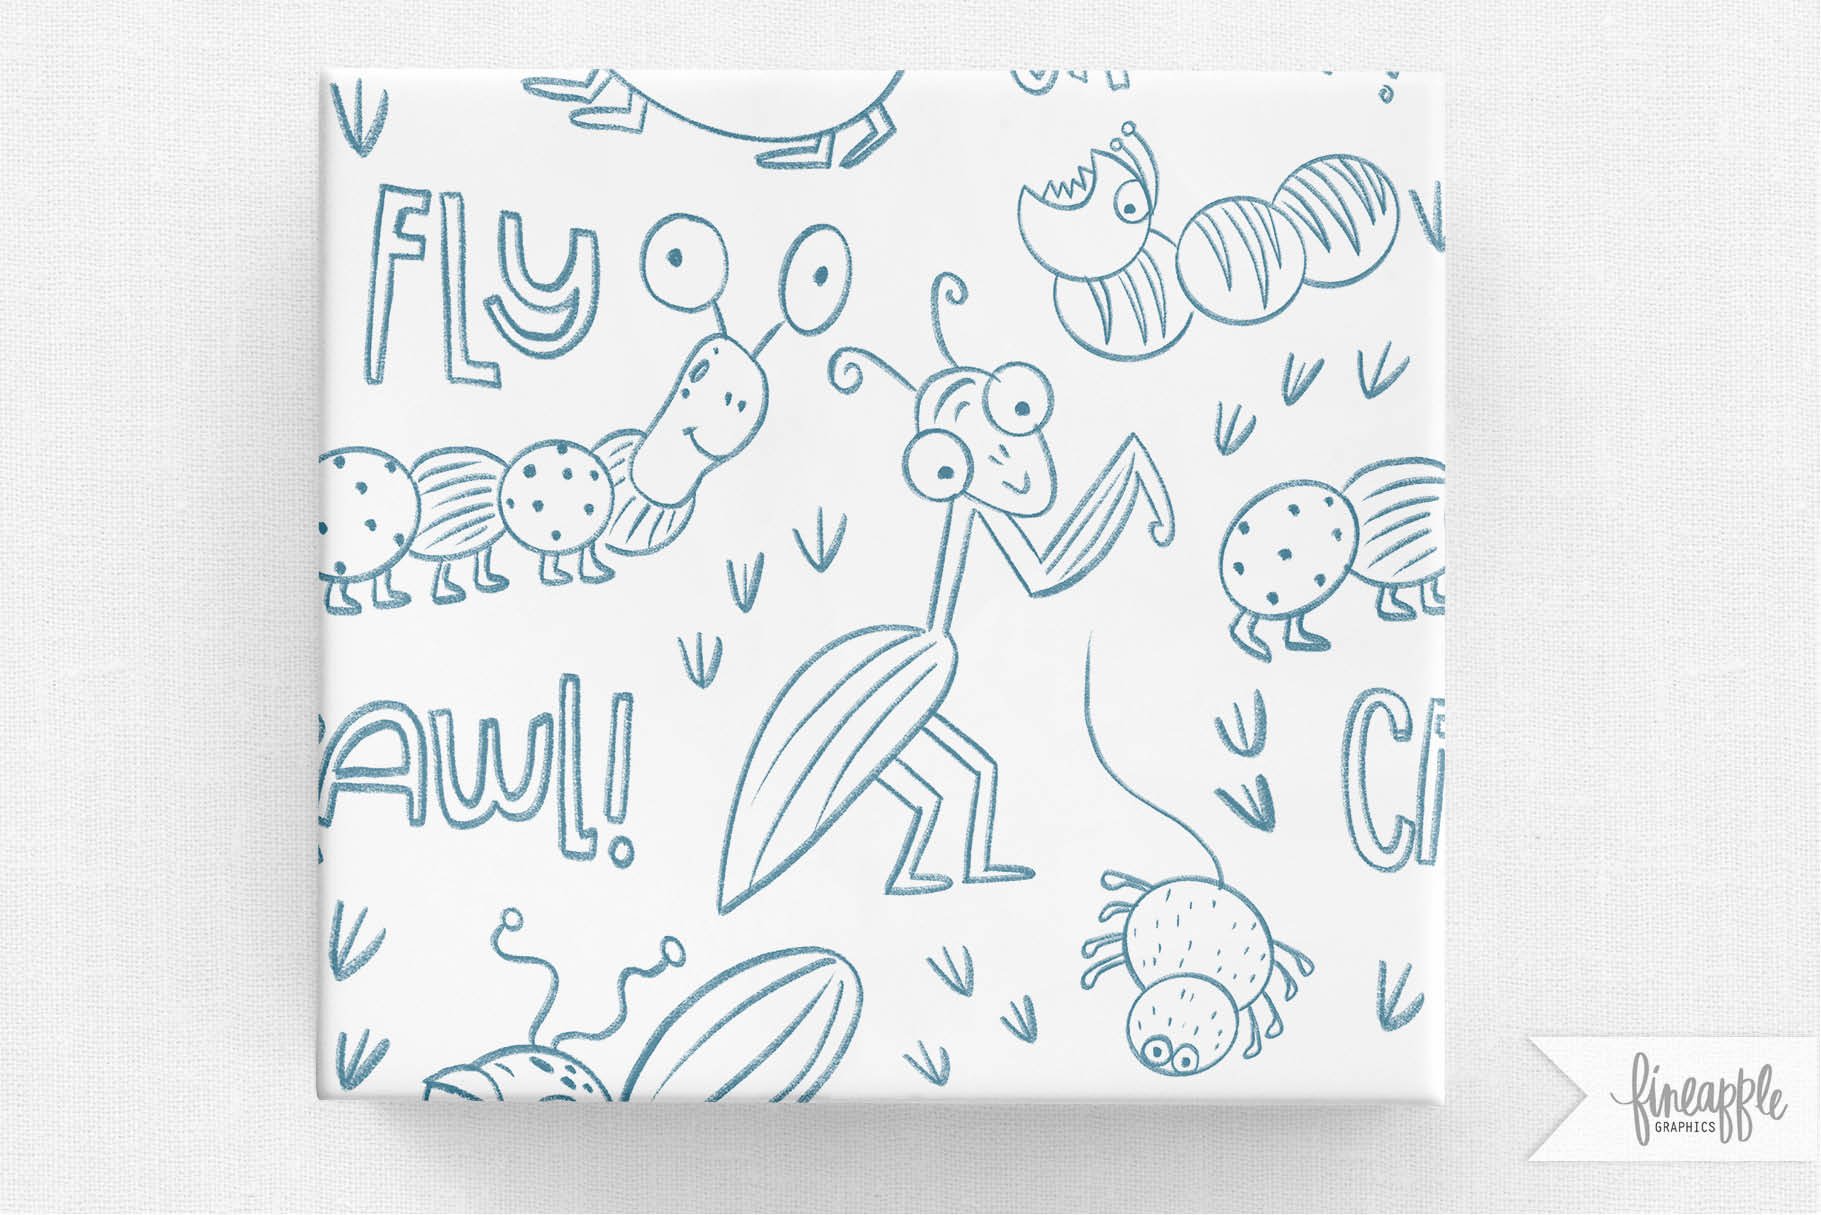 Tile with the hand drawn insects.